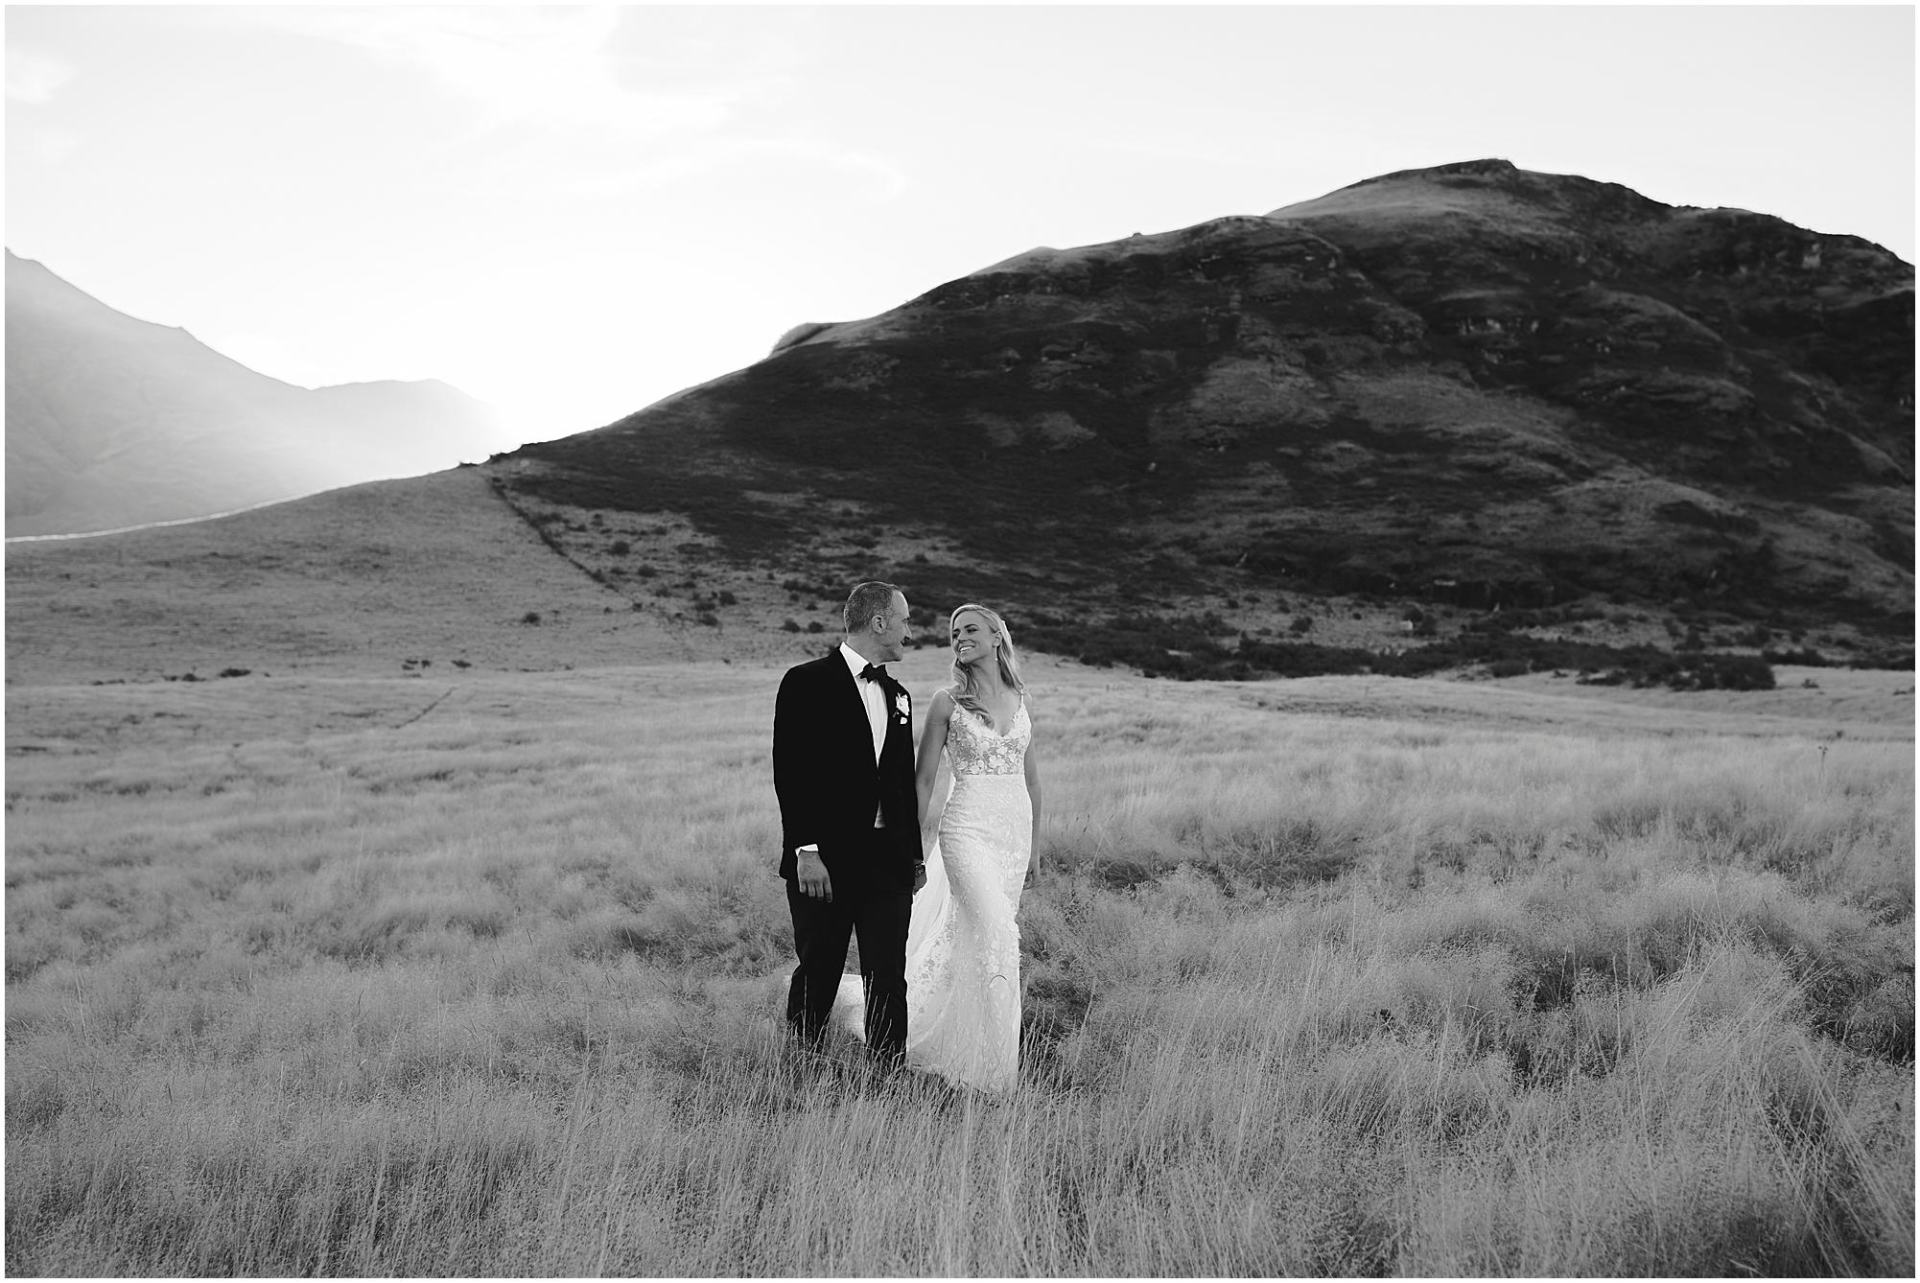 Charlotte Kiri Photography - Wedding Photography black and white photo of a bride wearing a lovely floral lace fitted dress, and her groom wearing a classy black suit, walking hand in hand as they cross over a grassy plain, with mountains behind in Wanaka, New Zealand.